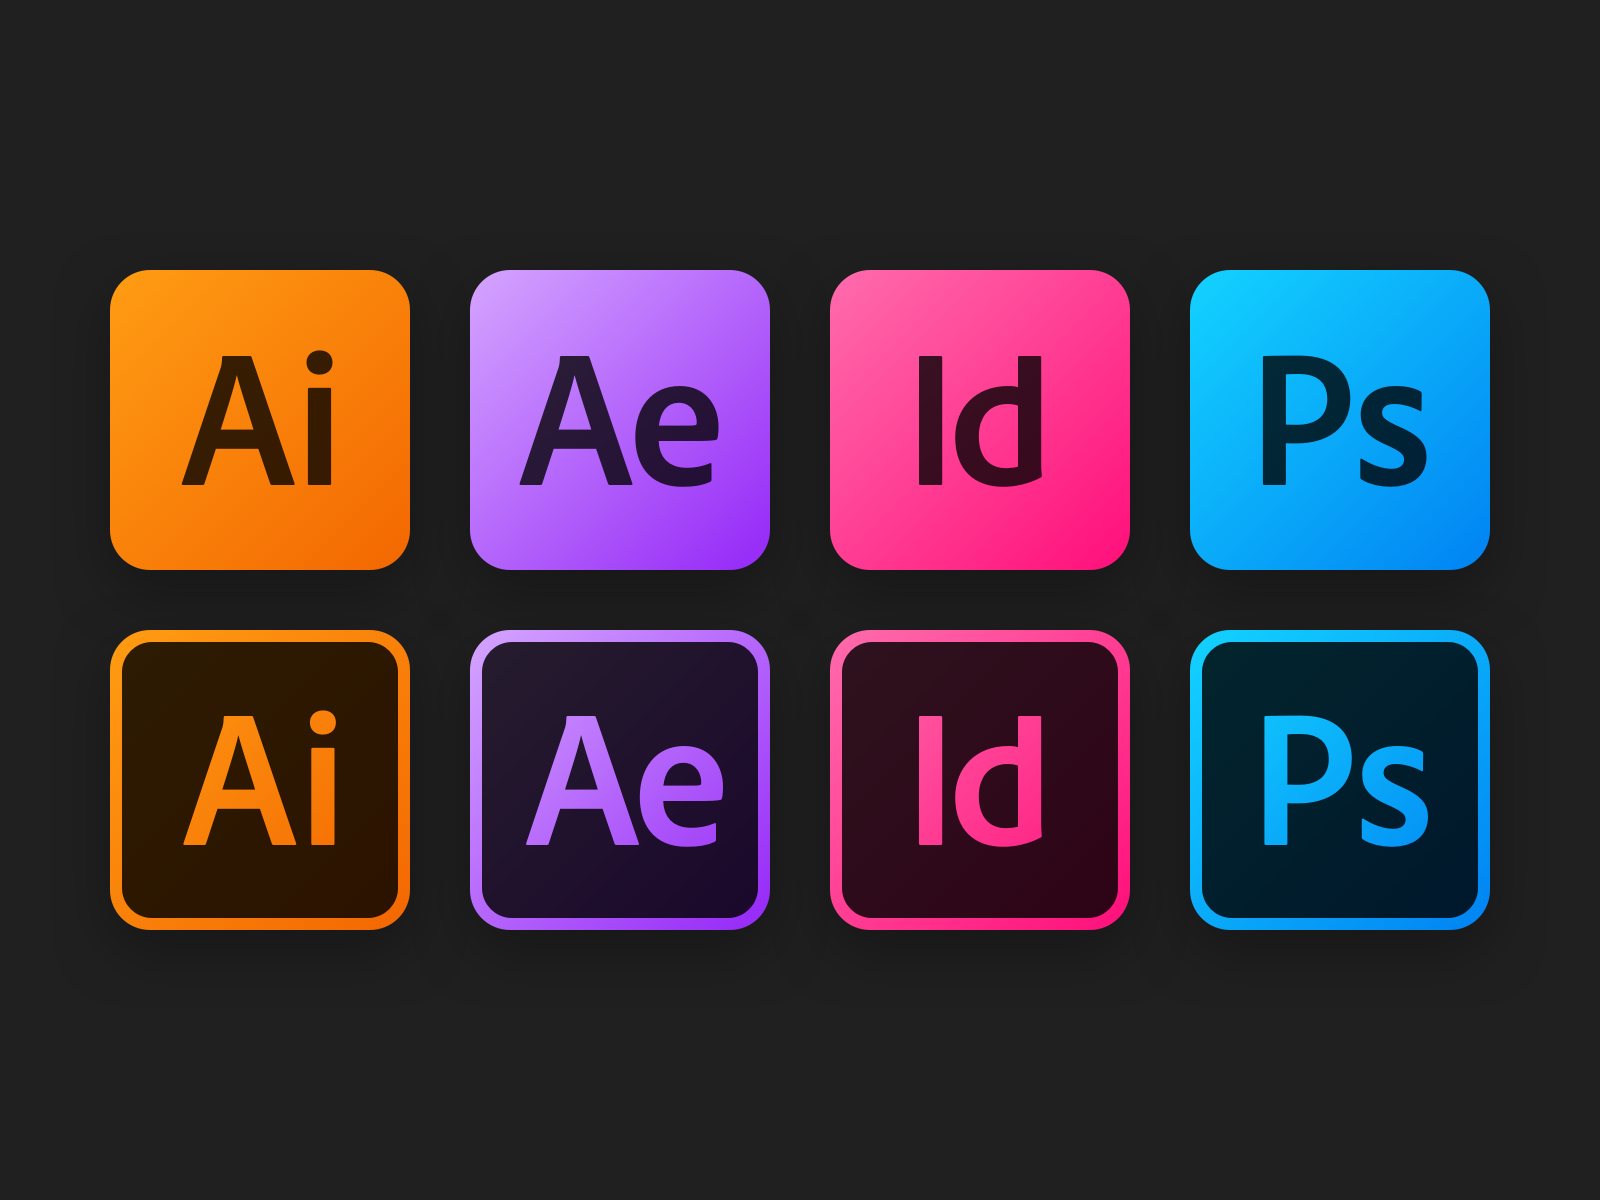 Adobe Icons by Damian Kidd on Dribbble